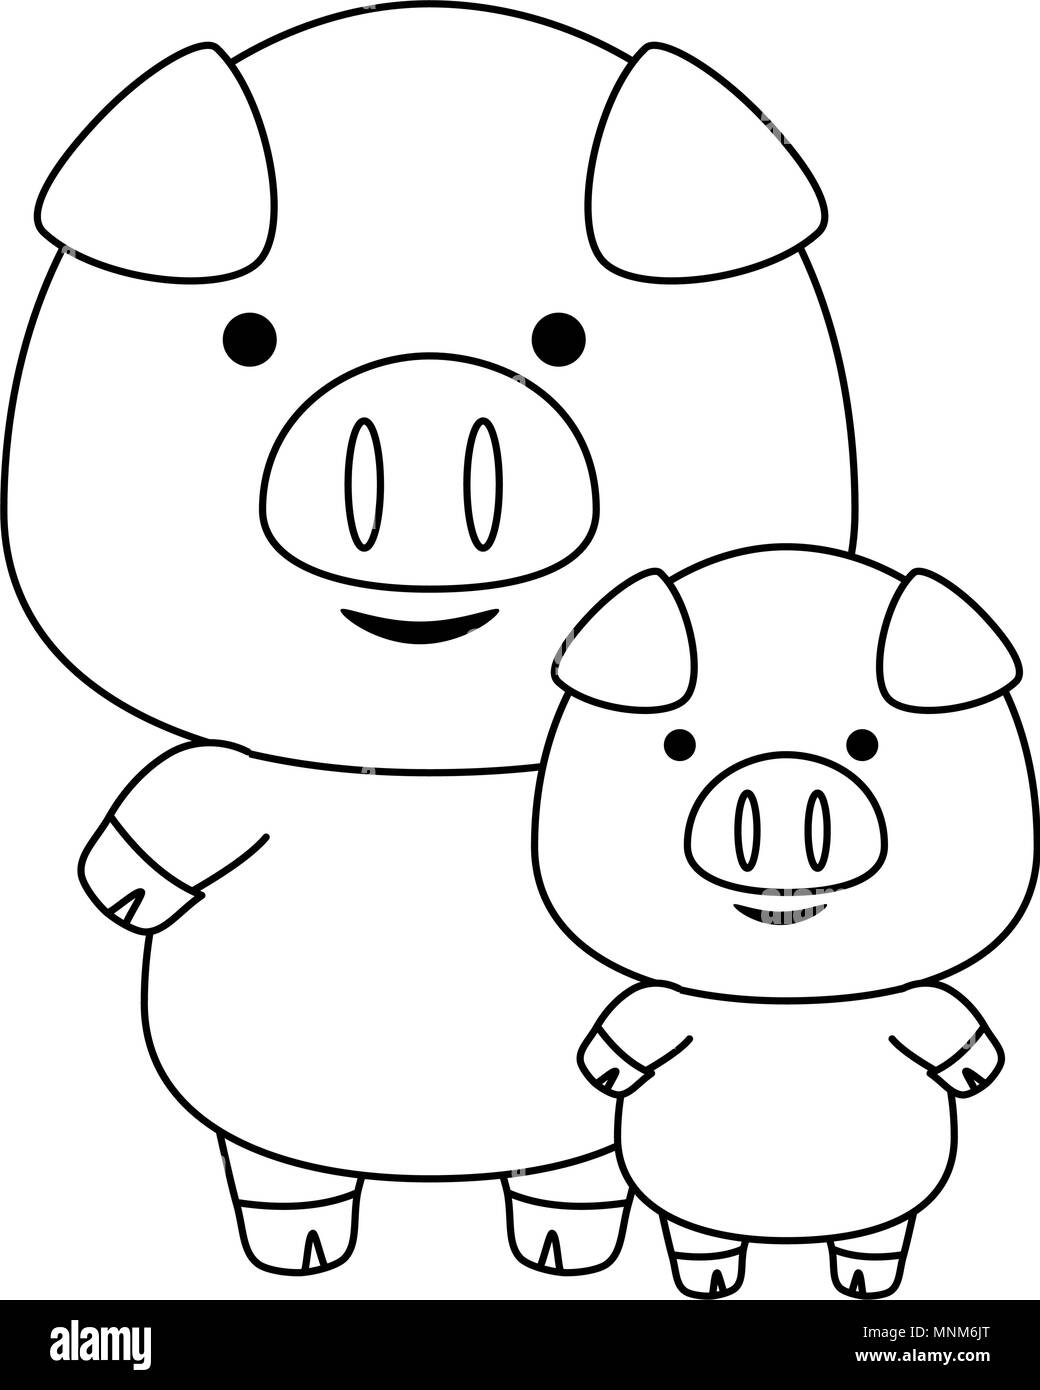 Little Black Pig And Son